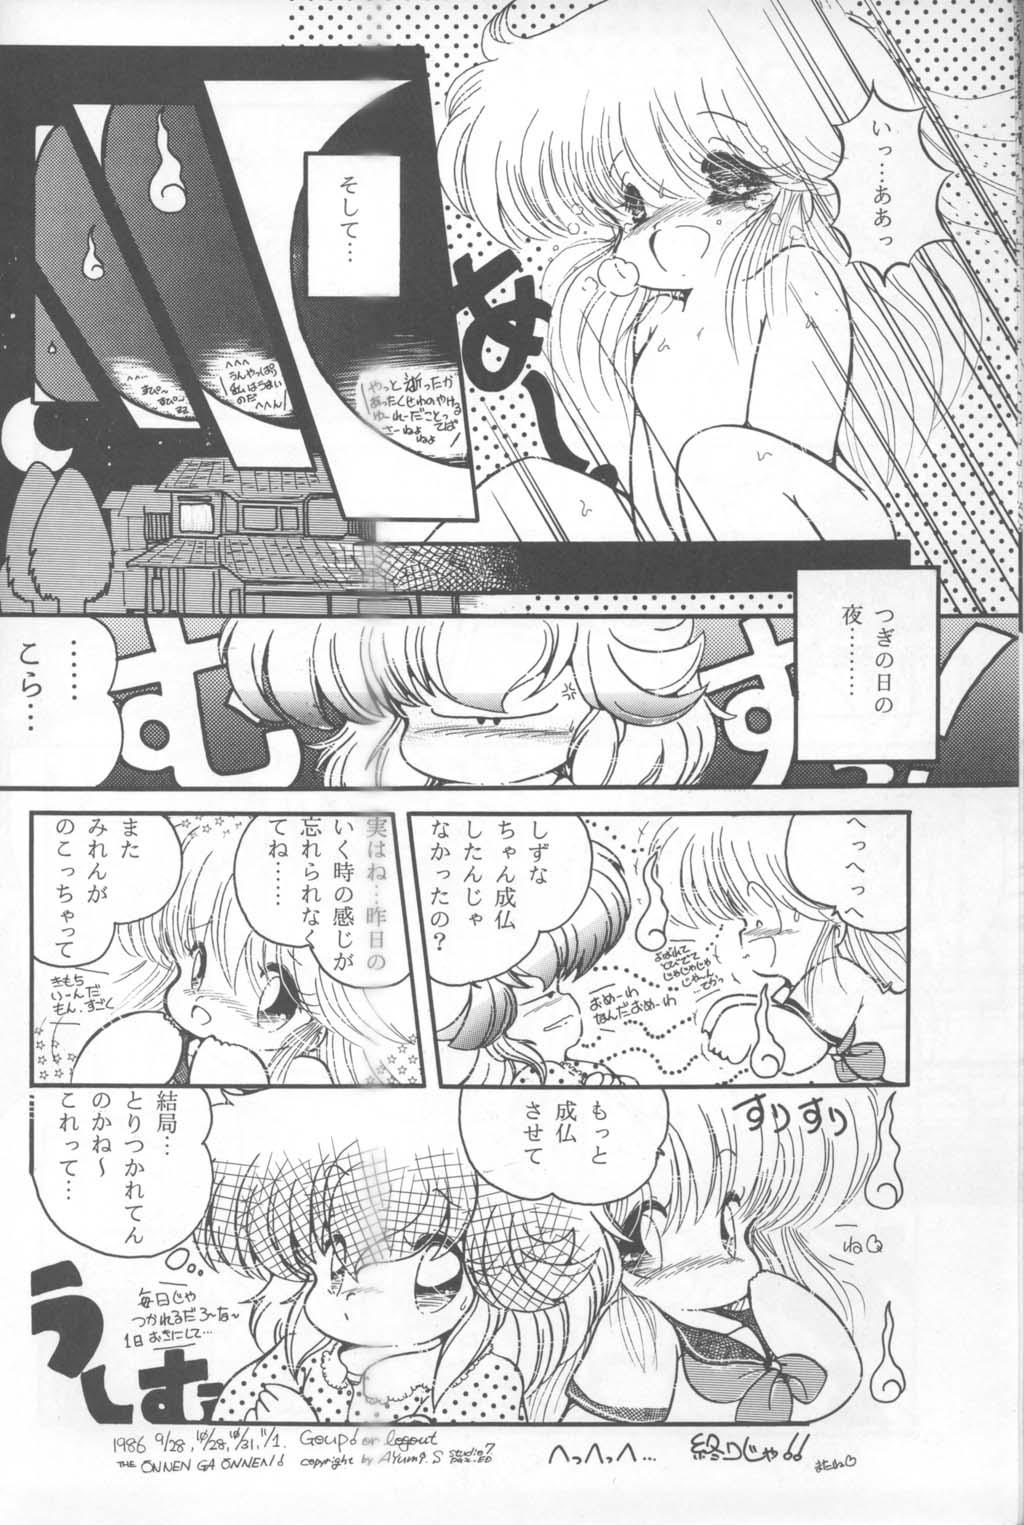 Shower MEMORIES - Dirty pair Defloration - Page 11